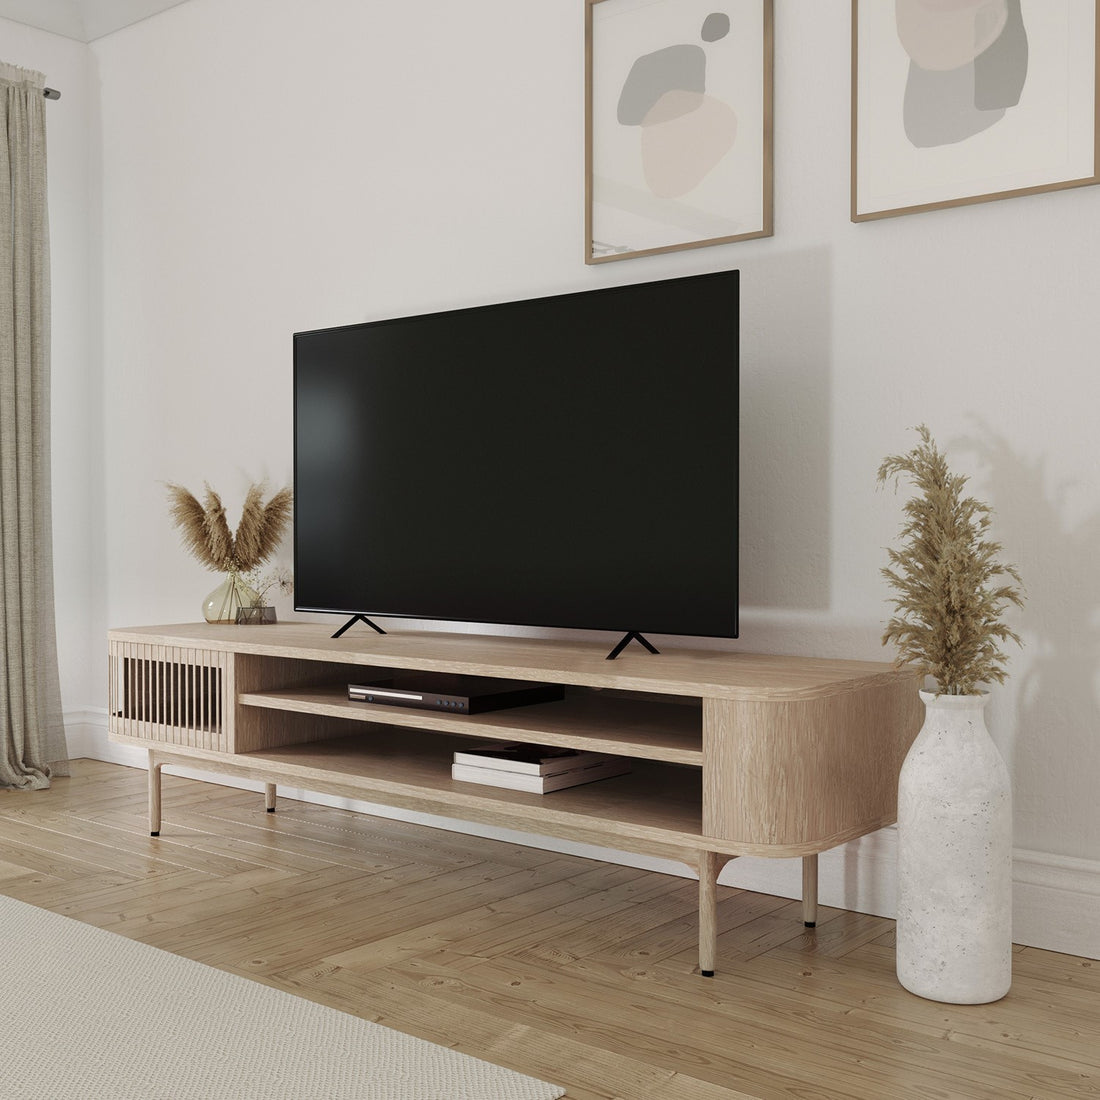 TV Stand Buying Guide